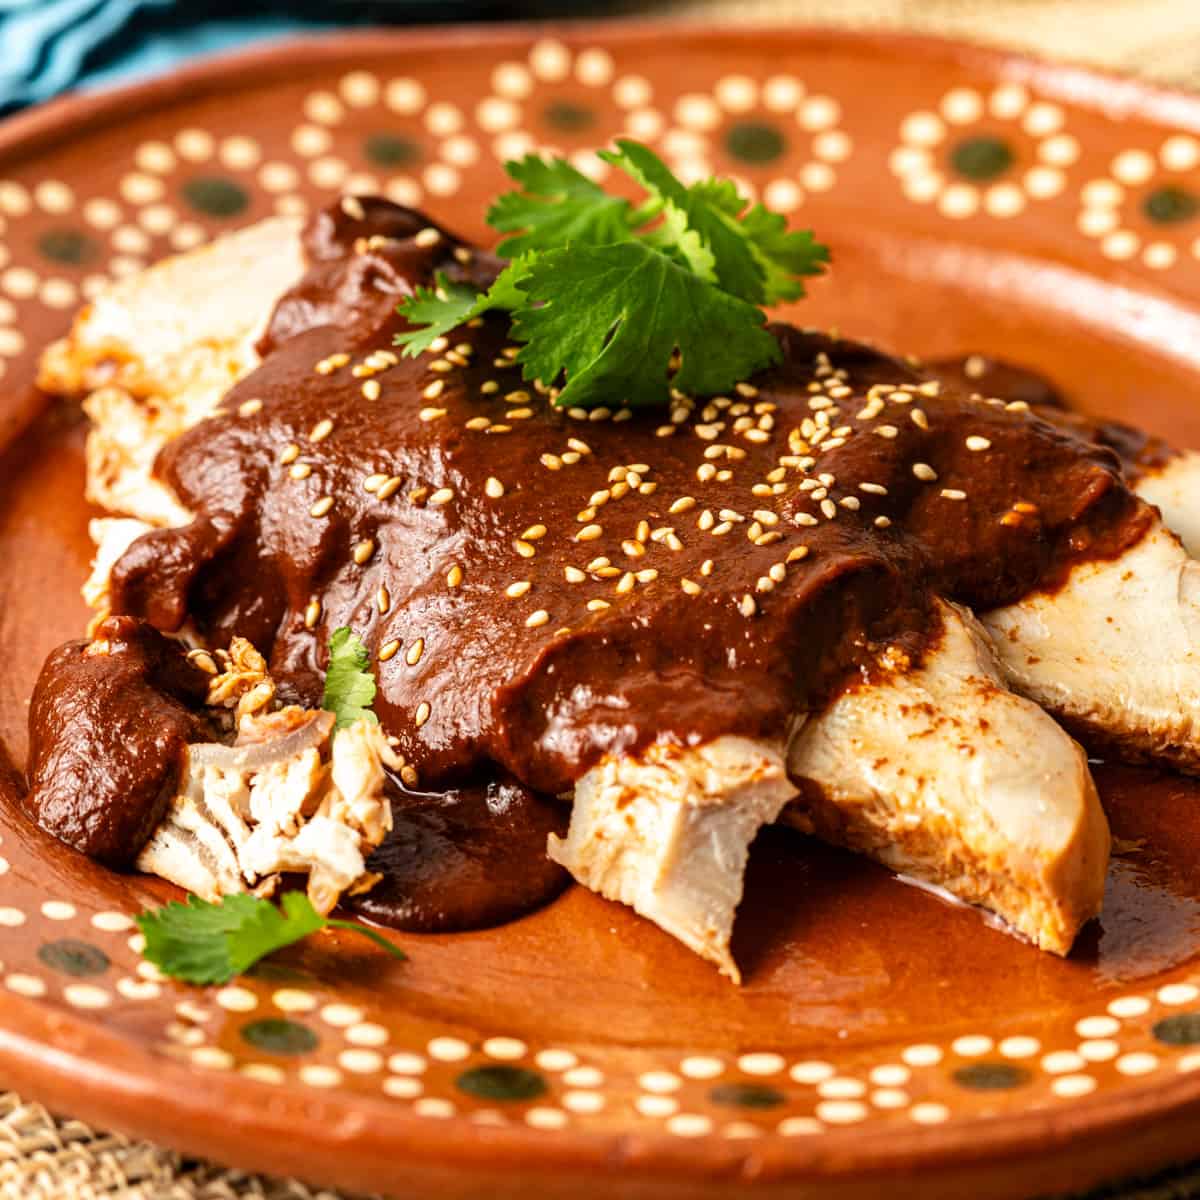 side view: mole poblano over turkey on a ceramic plate